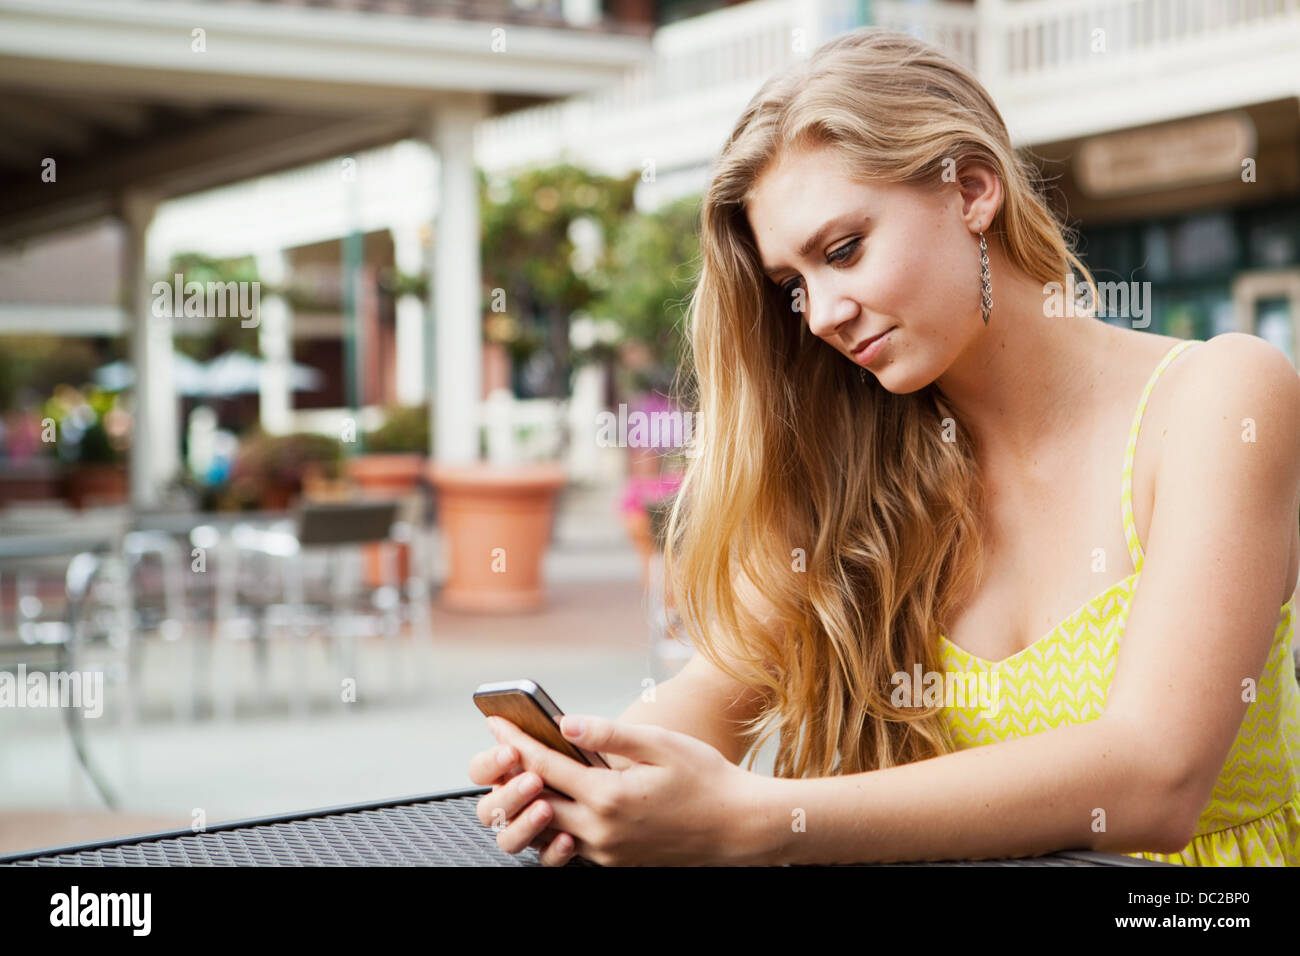 Woman looking at mobile phone Stock Photo